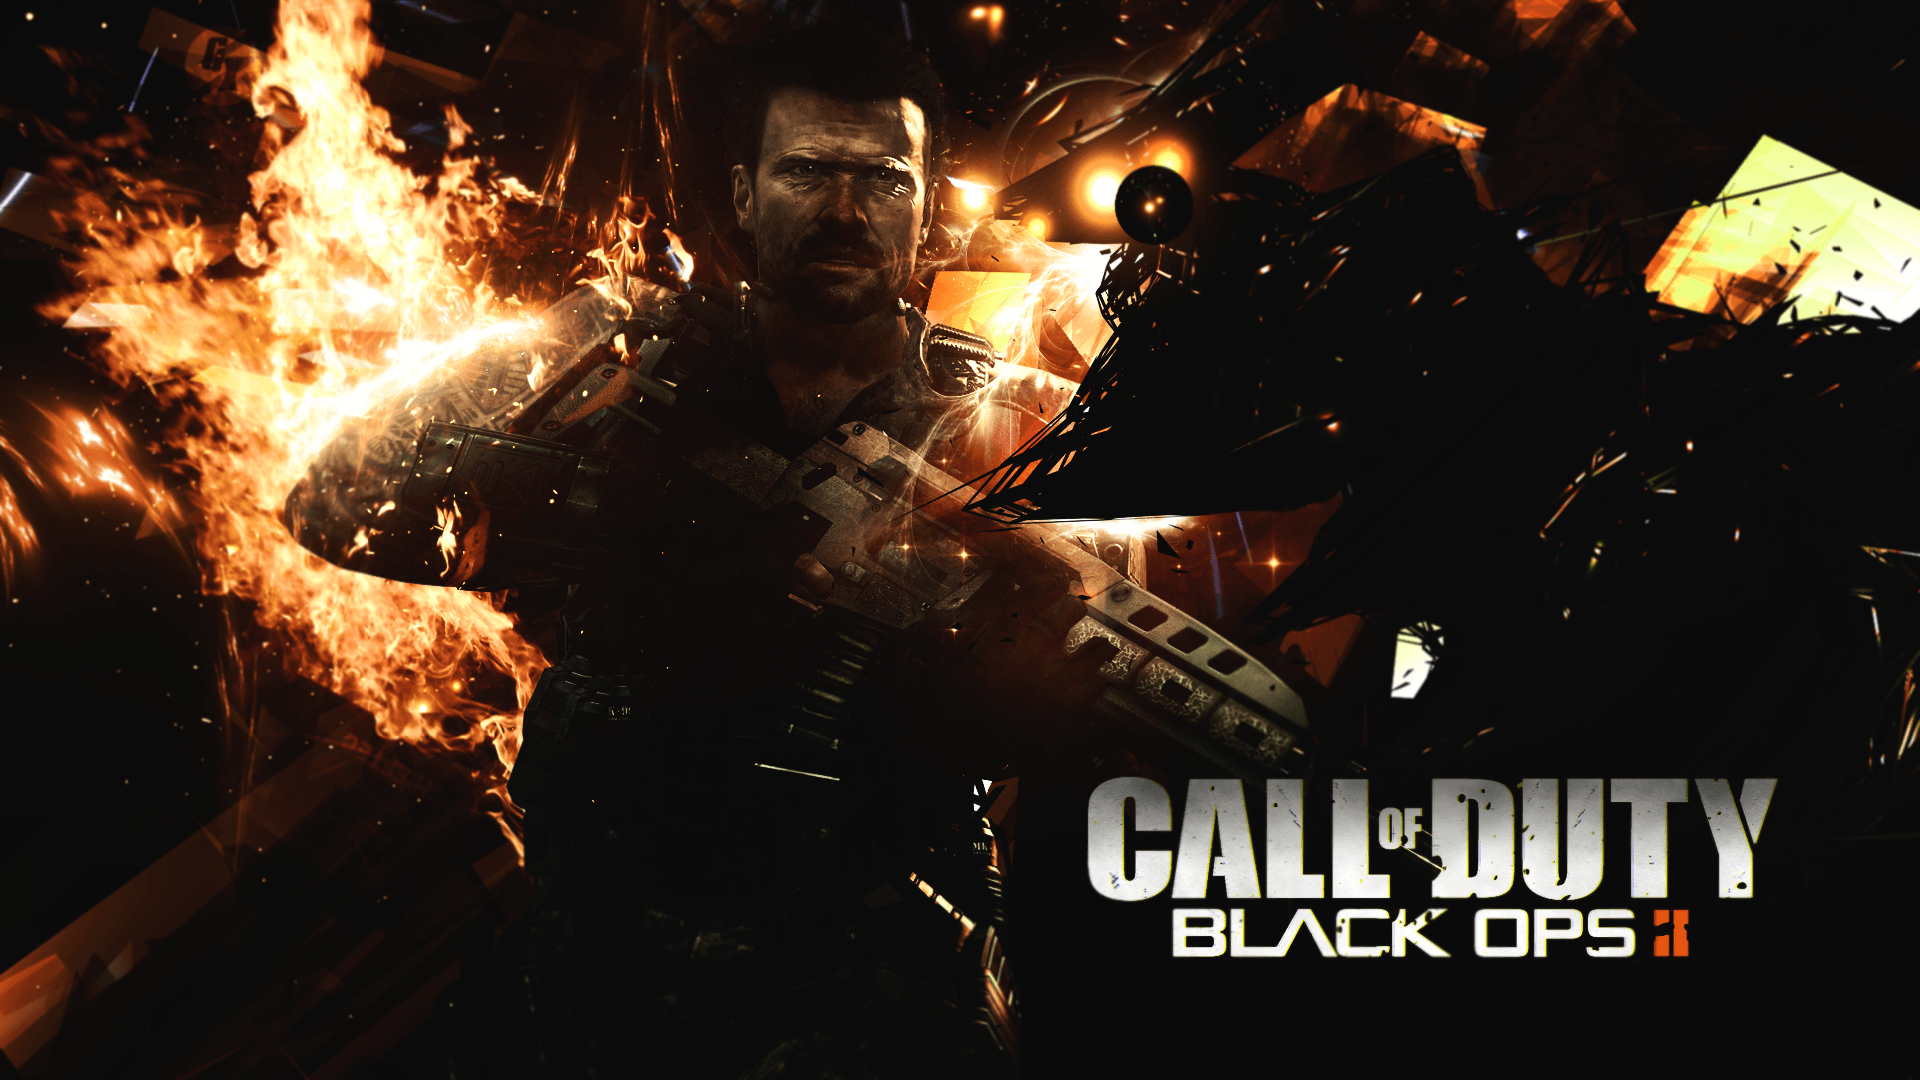 Wallpaper Of Call Of Duty Black Ops 2 Gallery (77 Plus)